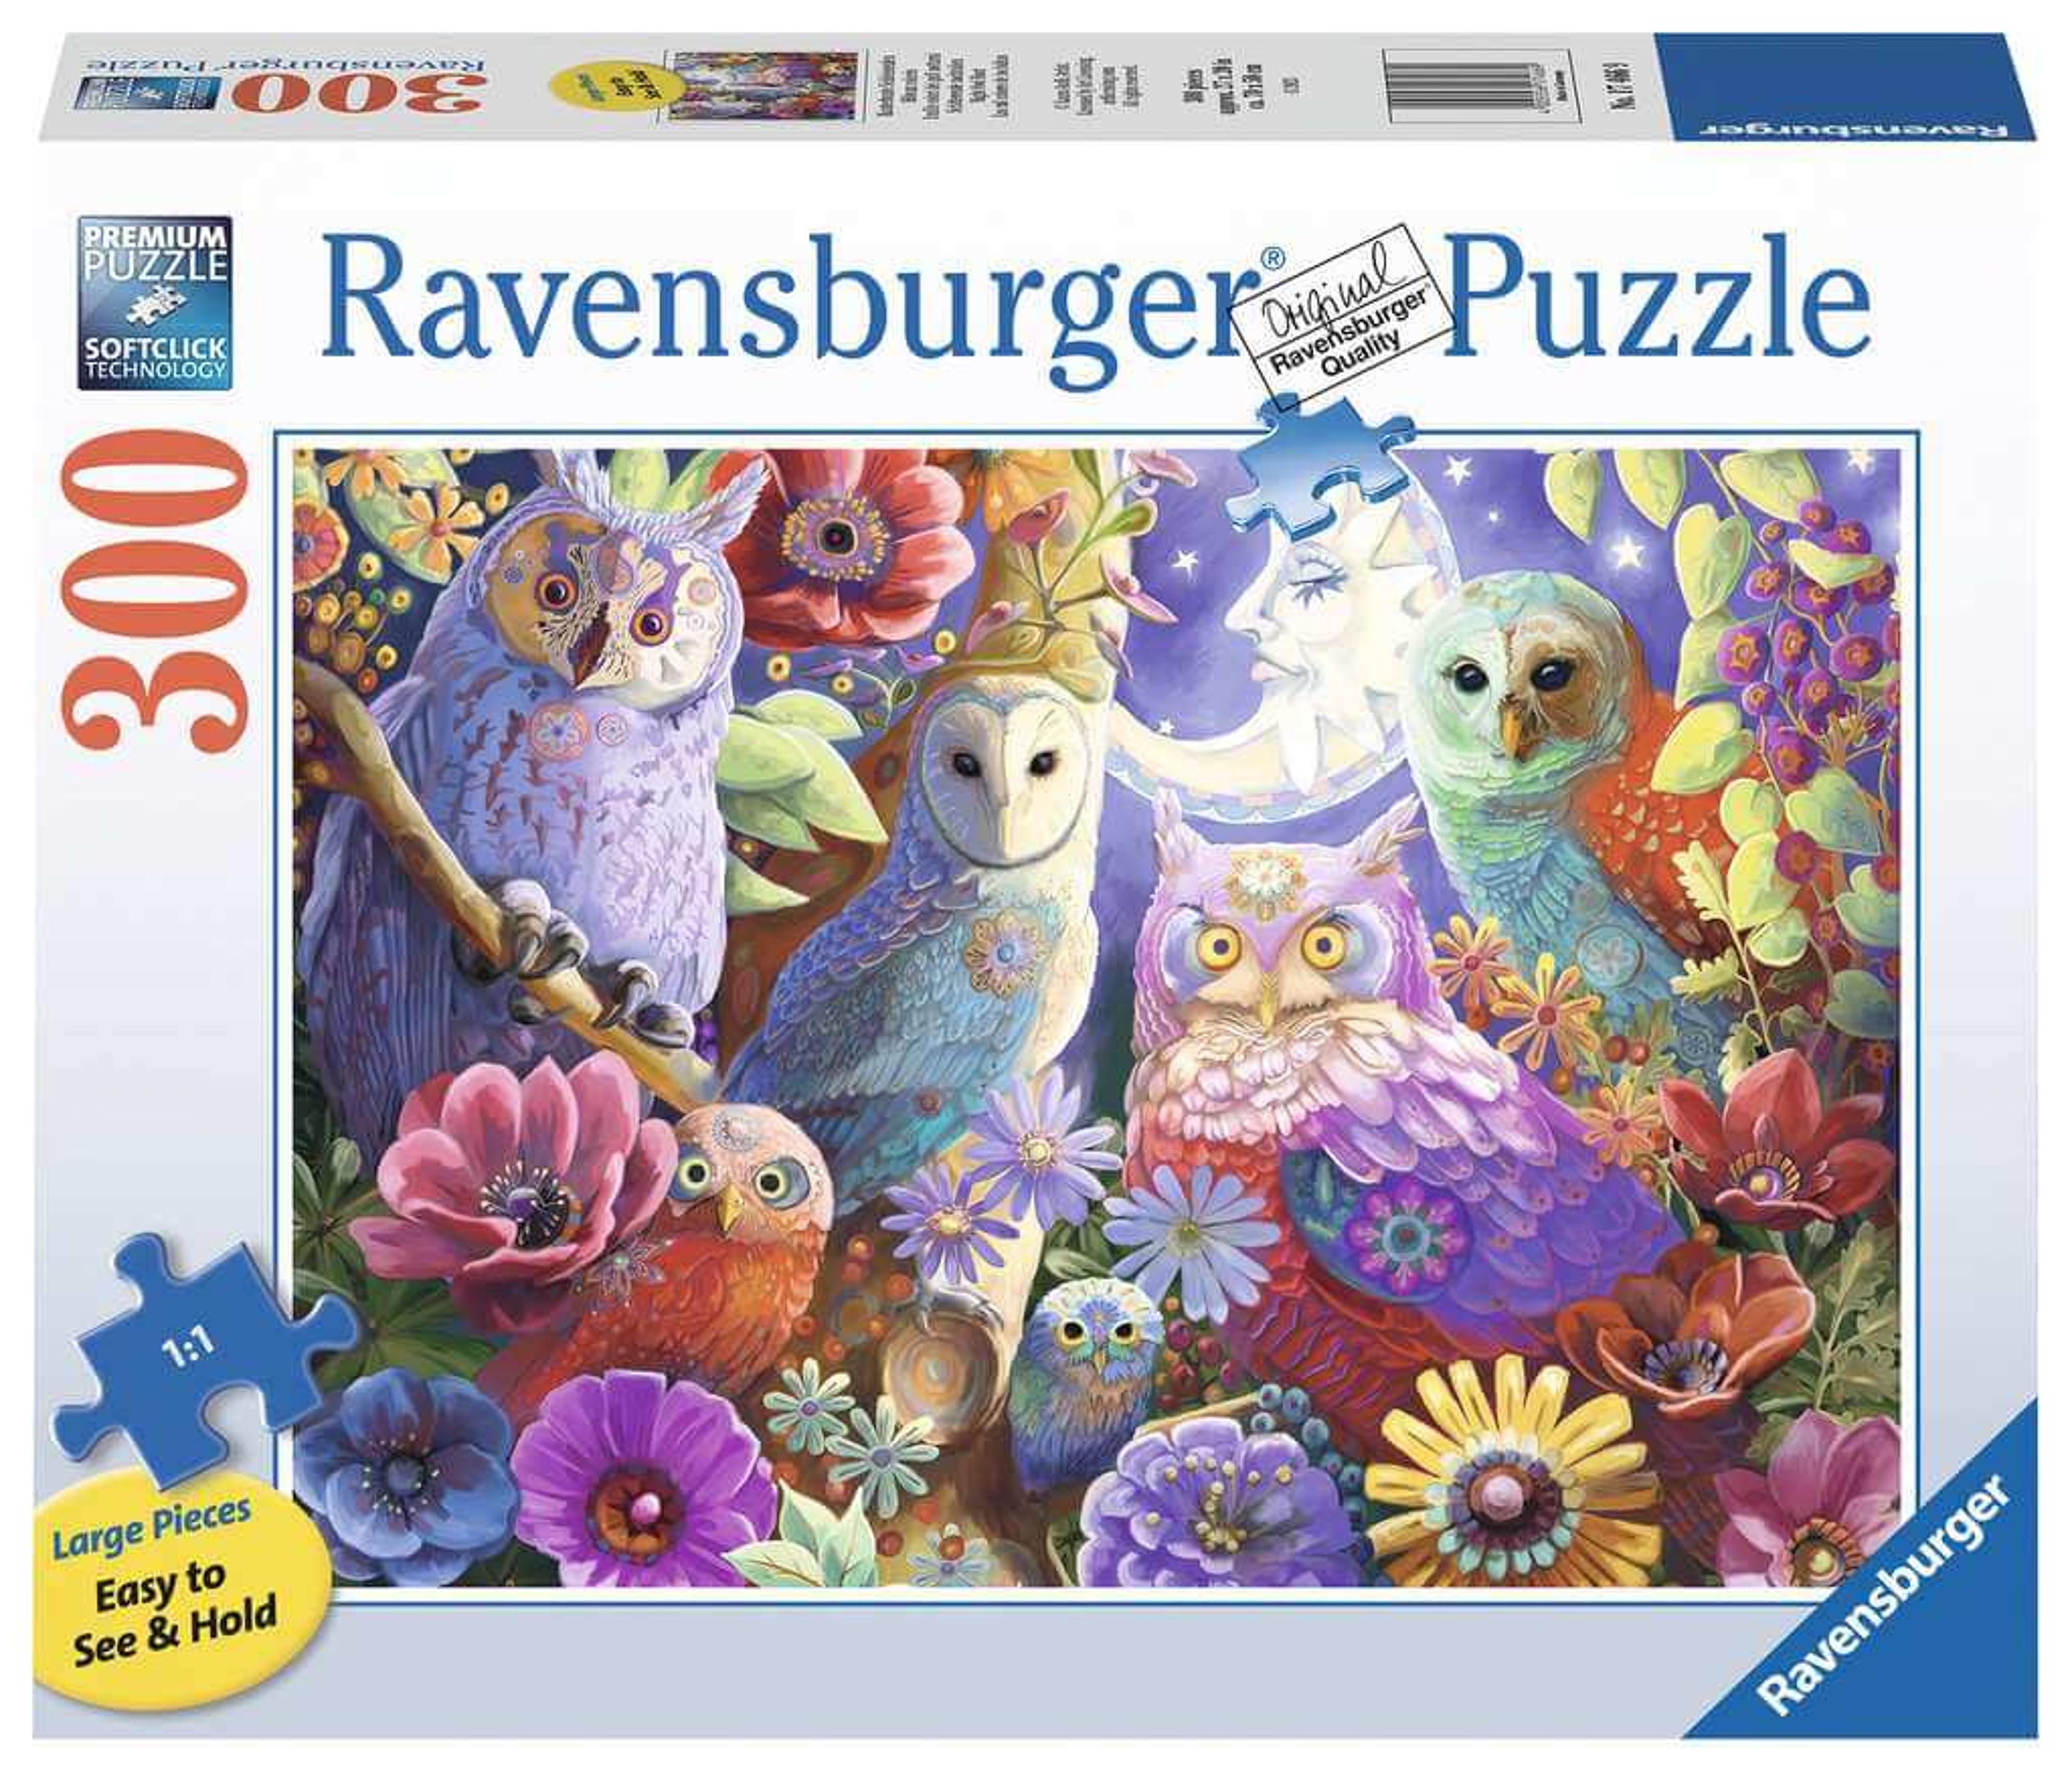 Ravensburger Night Owl Hoot 300pc Puzzle (Large Pieces Style)